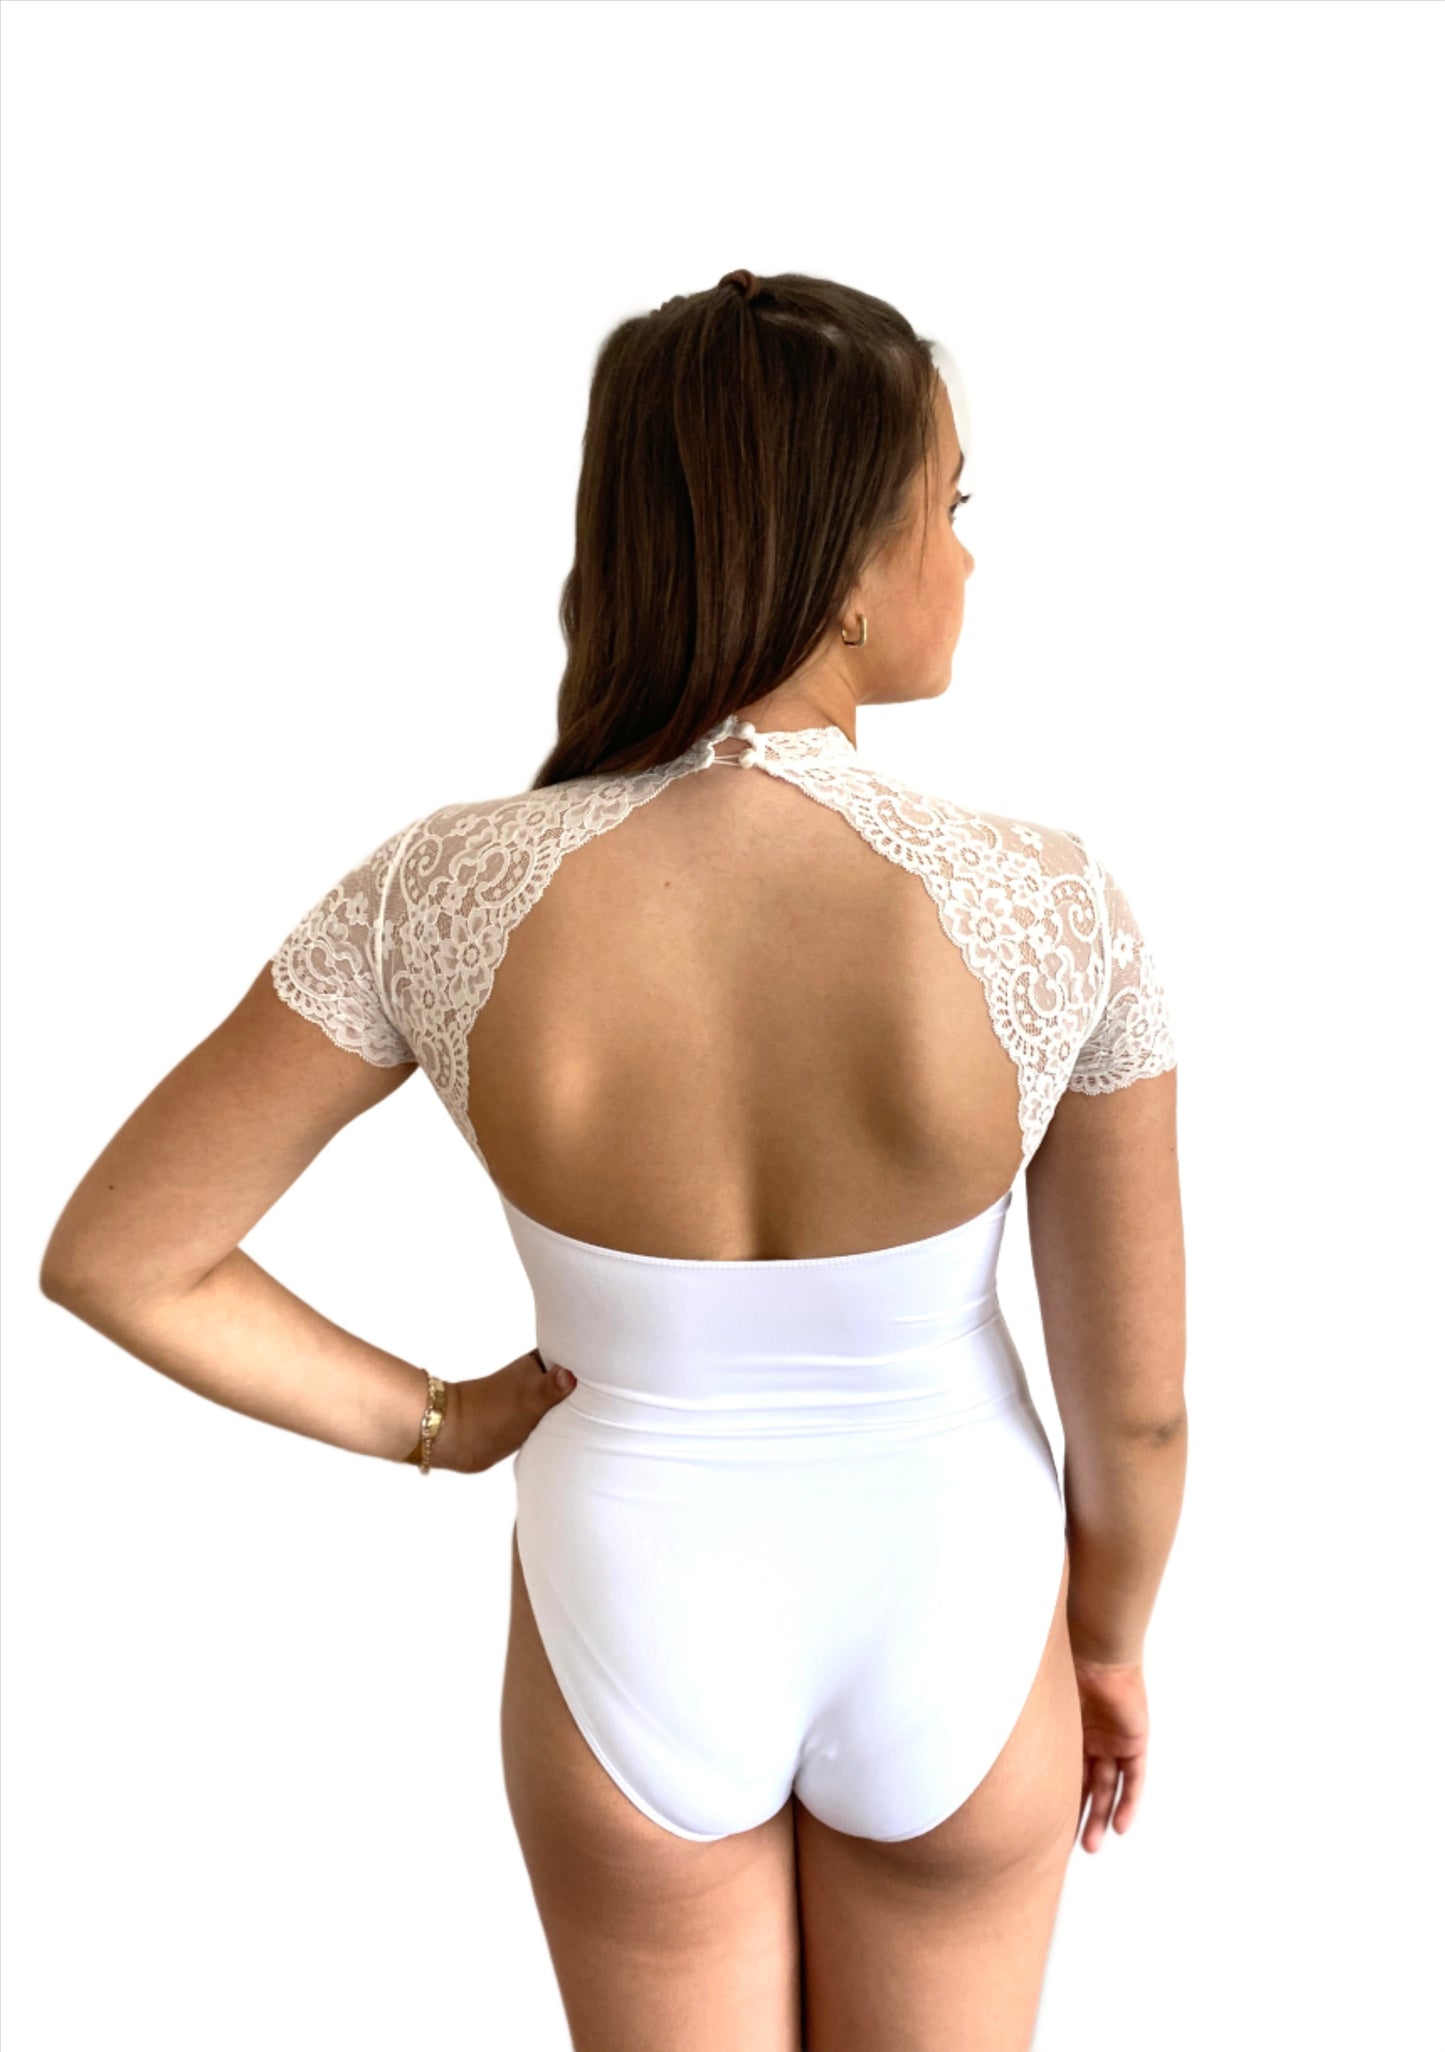 Ballet leotard with lace top, lace sleeves and key hole back in white from The Collective Dancewear